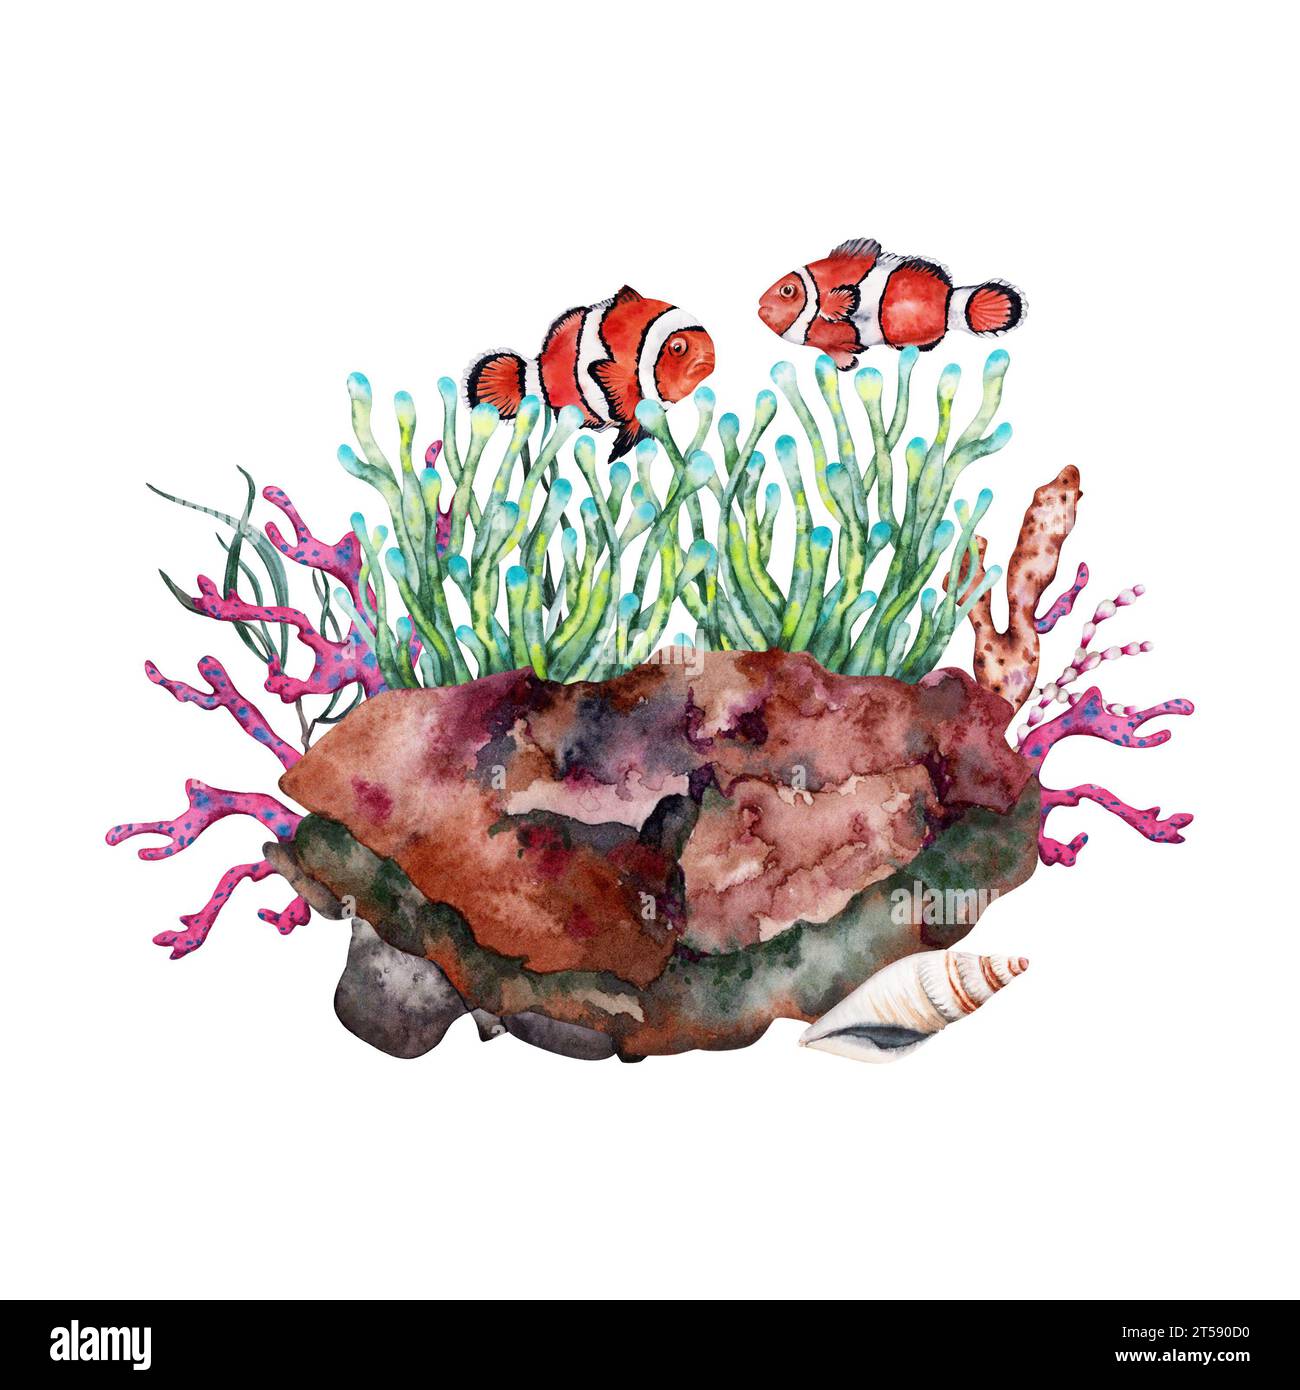 Two Orange clown fish near anemone growing over reef rock with corals and seaweed. Hand drawn watercolor illustration on white background. Part of tro Stock Photo